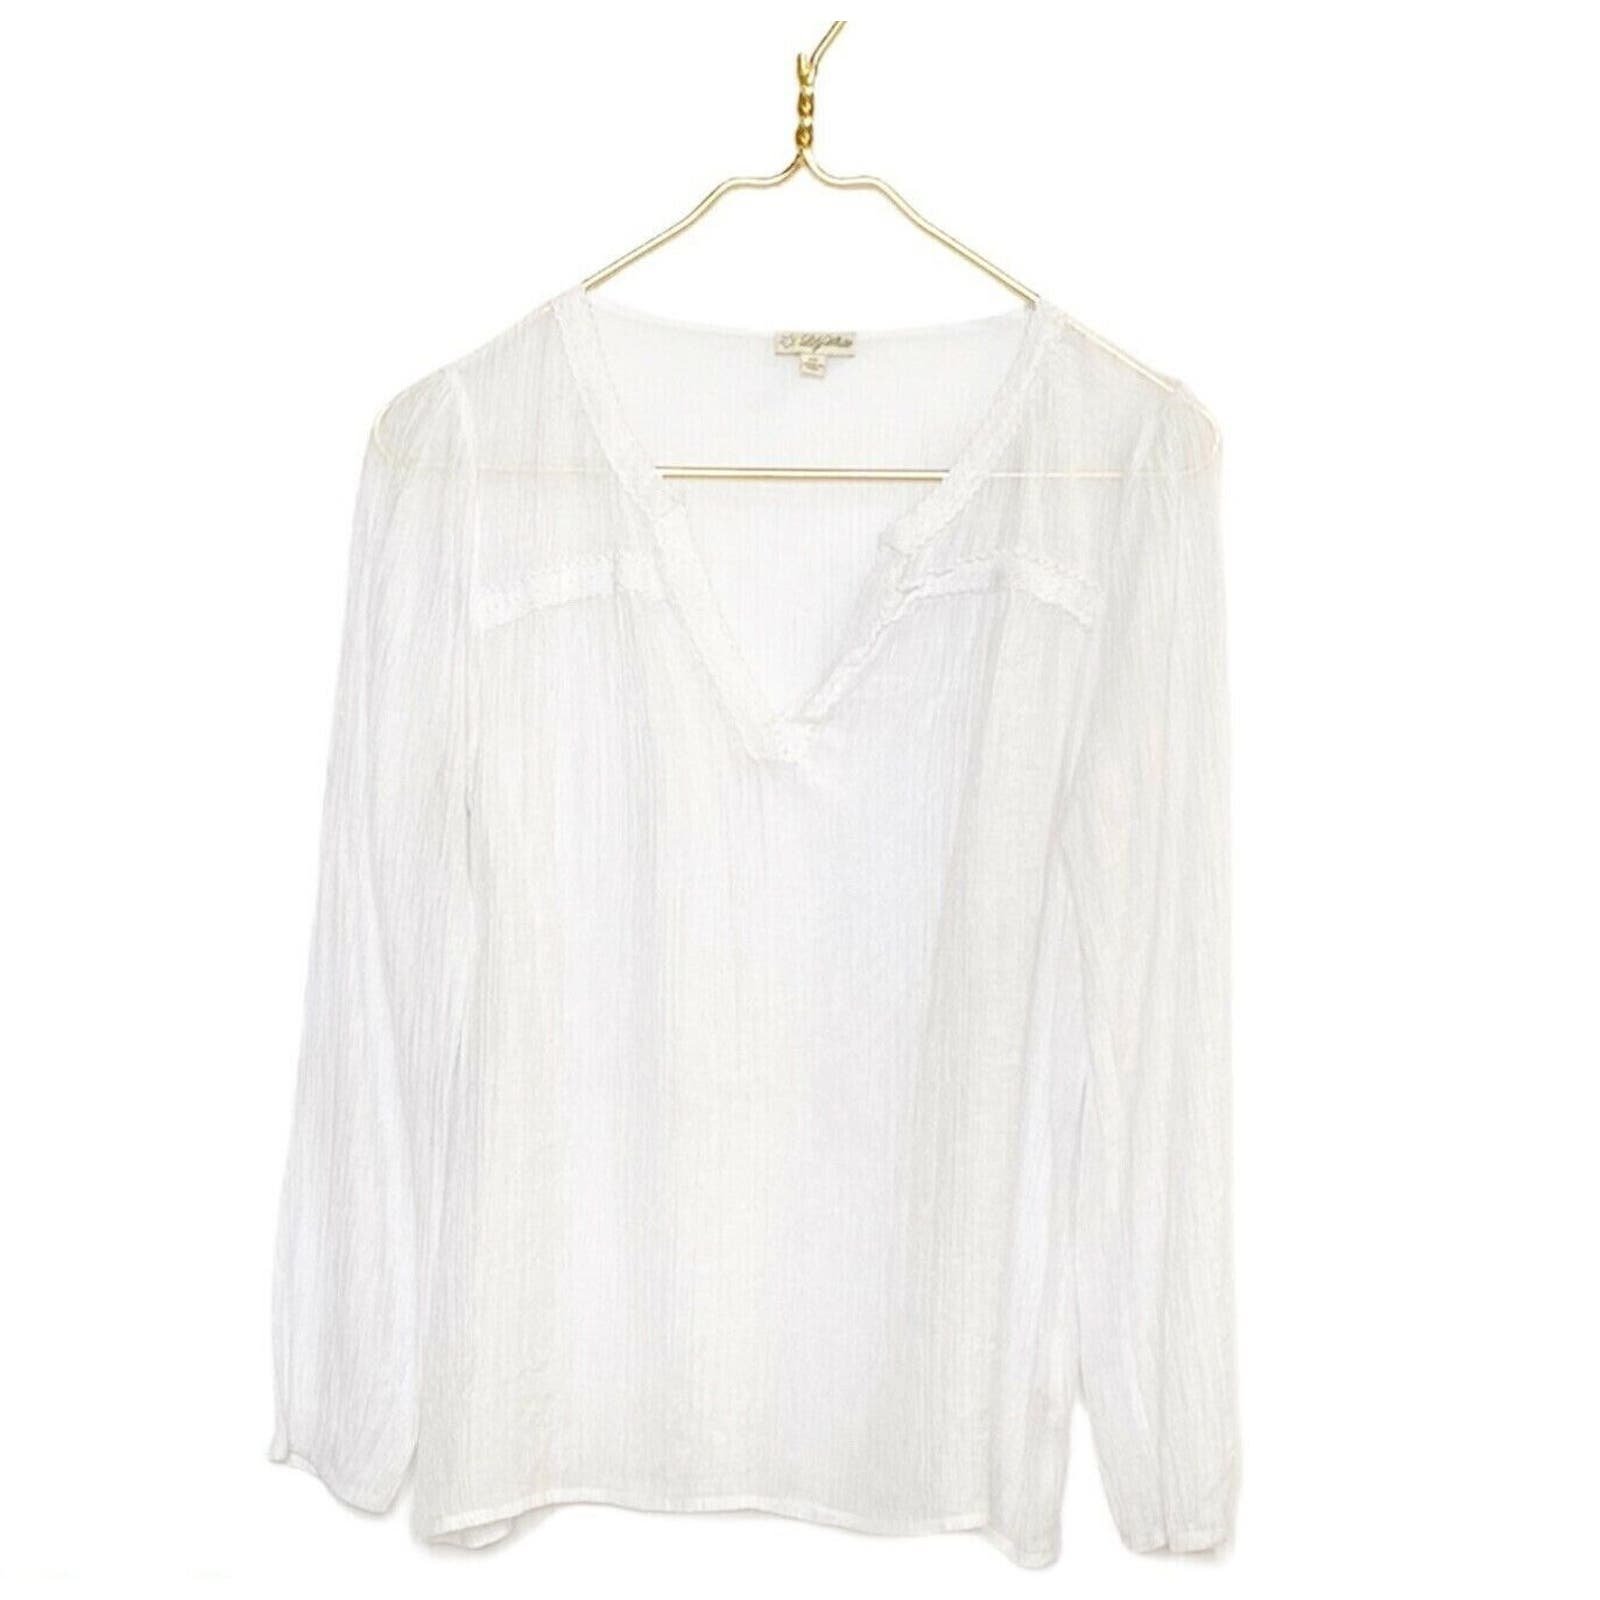 Stylish Lily White V Neck Top Sheer Long Sleeve Of White Embroidered Trim Sz Xs jMQymUXQ5 Discount